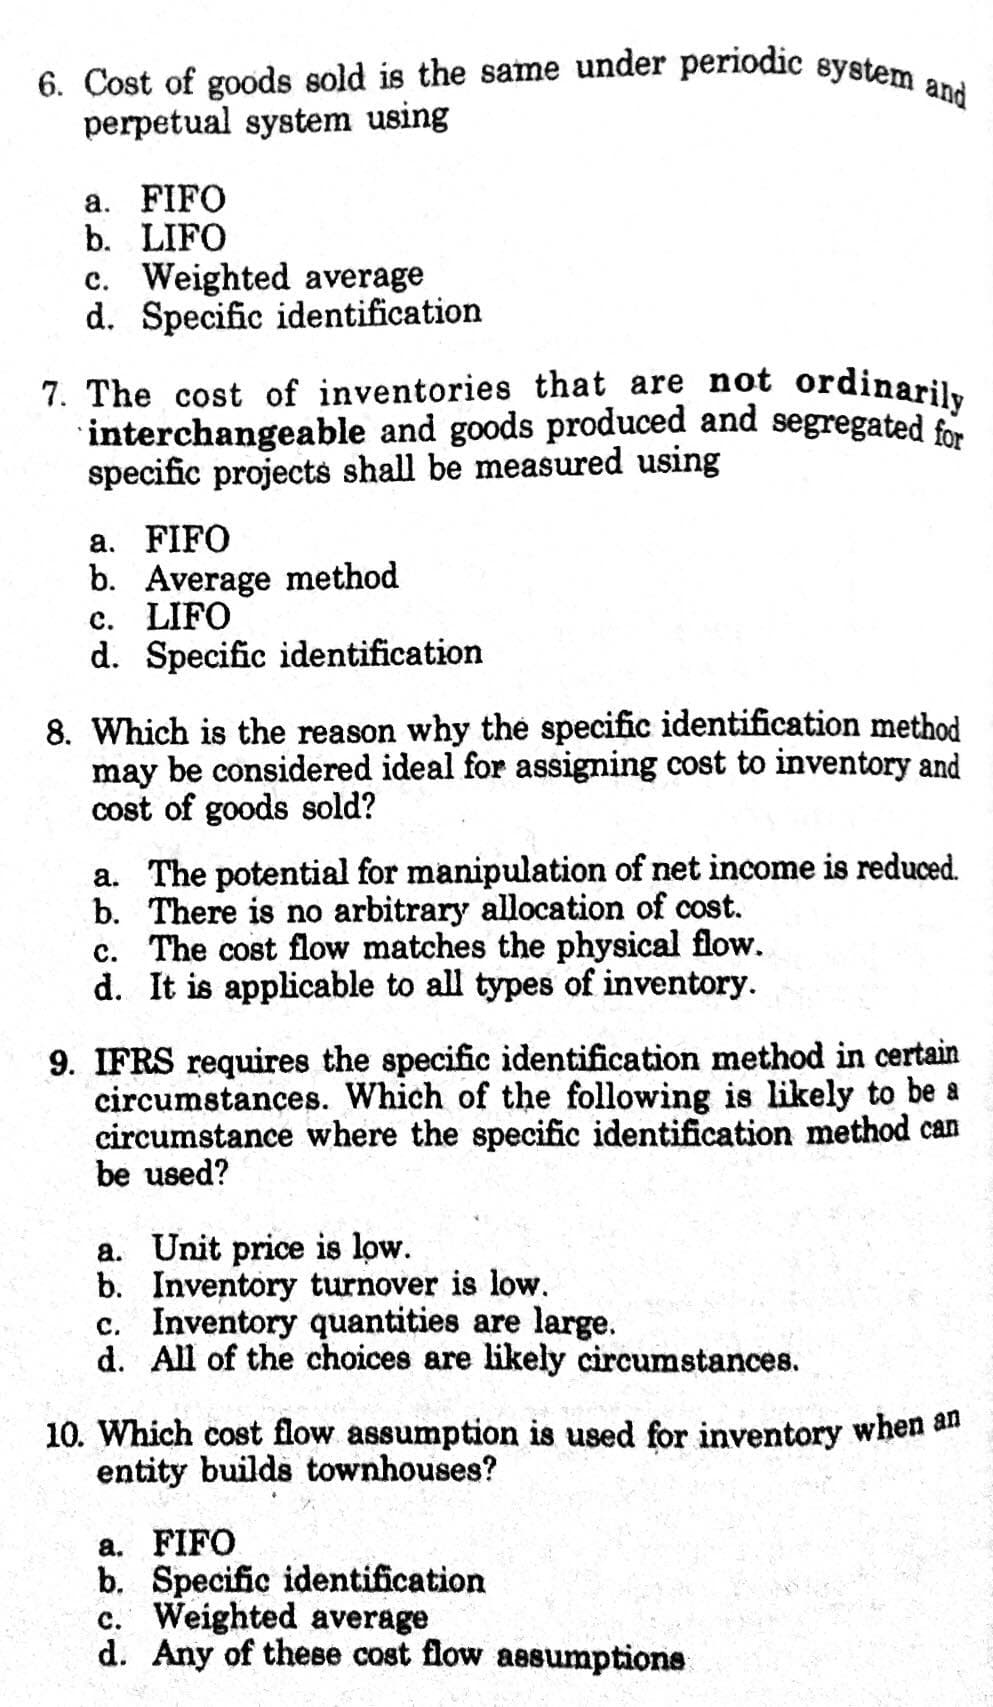 7. The cost of inventories that are not ordinarily
6. Cost of goods sold is the same under periodic system and
perpetual system using
a. FIFO
b. LIFO
c. Weighted average
d. Specific identification
interchangeable and goods produced and segregated for
specific projects shall be measured using
a. FIFO
b. Average method
c. LIFO
d. Specific identification
8. Which is the reason why the specific identification method
may be considered ideal for assigning cost to inventory and
cost of goods sold?
a. The potential for manipulation of net income is reduced.
b. There is no arbitrary allocation of cost.
c. The cost flow matches the physical flow.
d. It is applicable to all types of inventory.
9. IFRS requires the specific identification method in certain
circumstances. Which of the following is likely to be a
circumstance where the specific identification method can
be used?
a. Unit price is low.
b. Inventory turnover is low.
c. Inventory quantities are large.
d. All of the choices are likely circumstances.
10. Which cost flow assumption is used for inventory when an
entity builds townhouses?
а. FIFO
b. Specific identification
c. Weighted average
d. Any of these cost flow aesumptions
